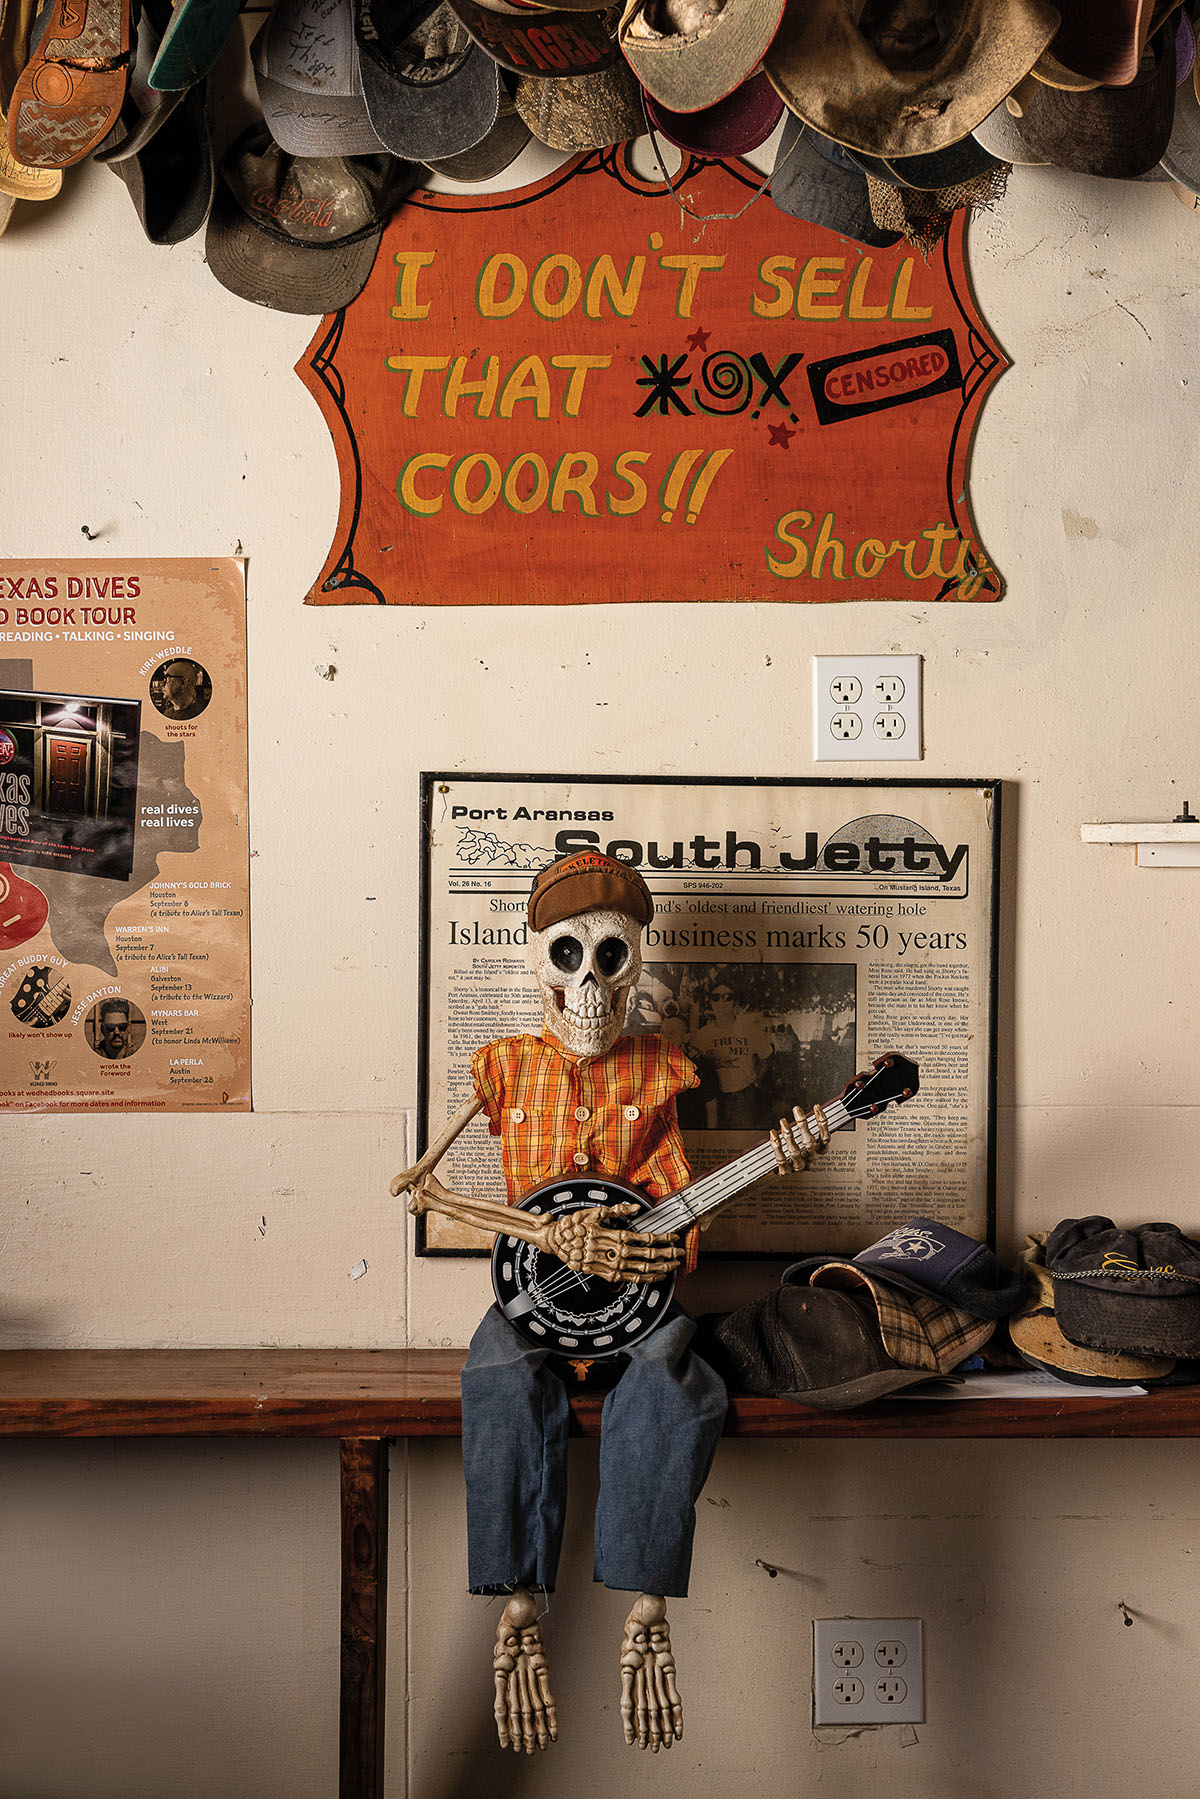 A skeleton wearing a shirt and holding a guitar in front of a collection of posters and memorabilia including a sign reading 